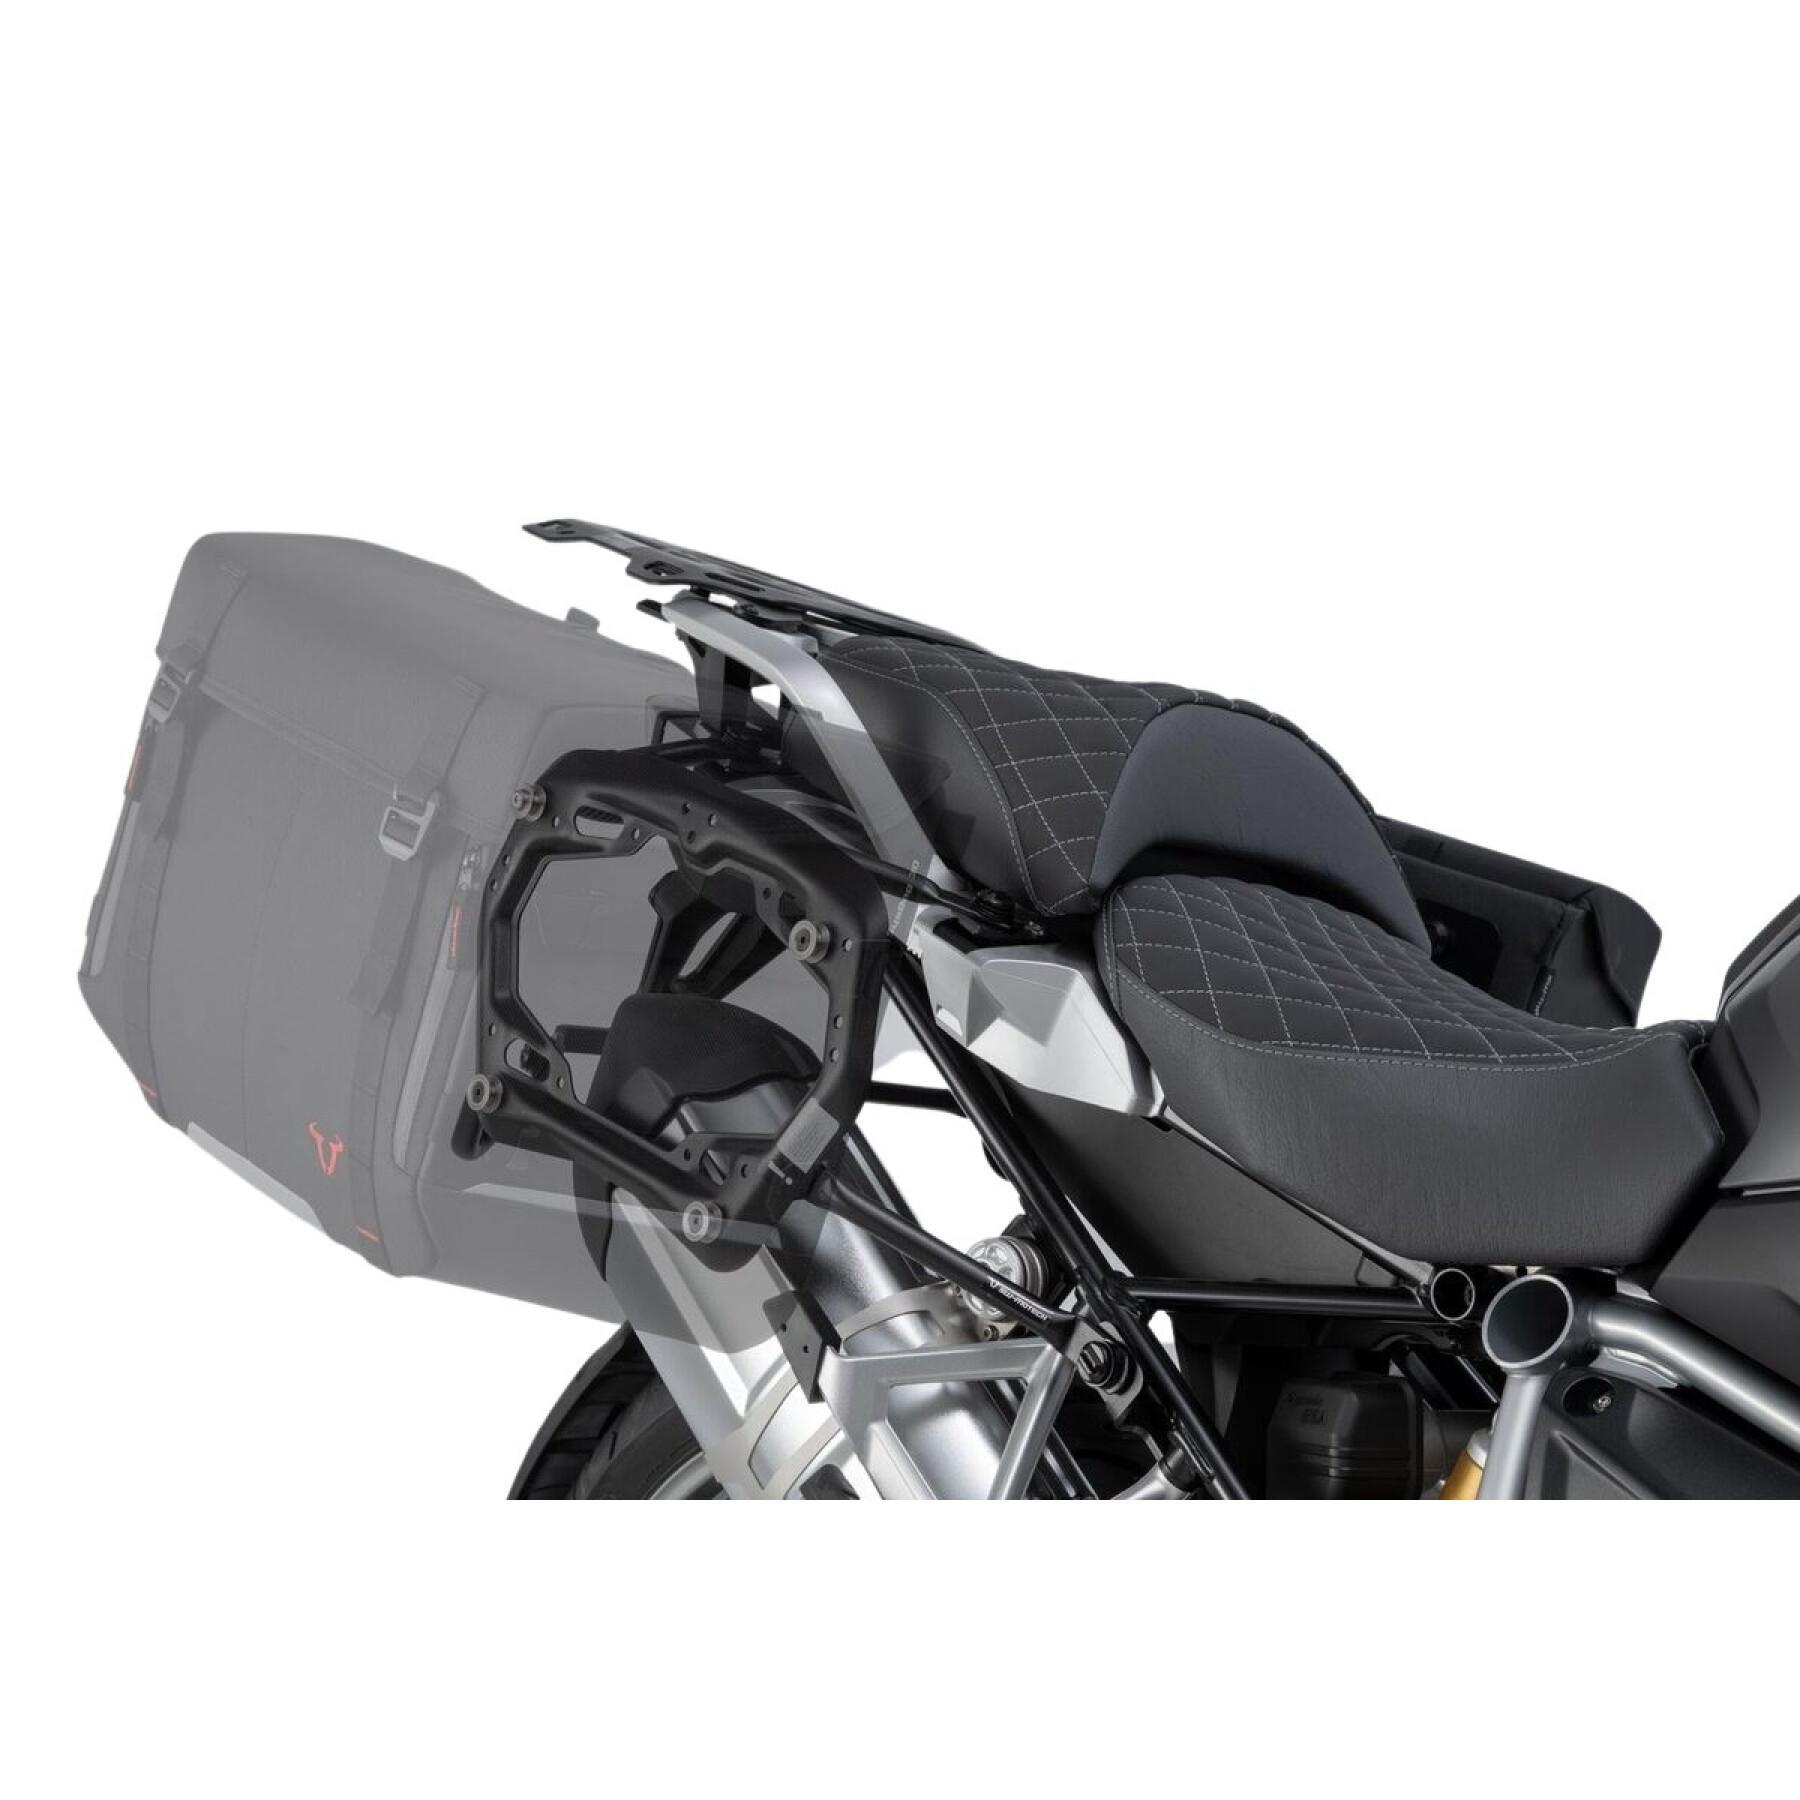 Paar zijkoffers SW-Motech Sysbag 30/30 BMW R 1200 GS LC (13-)/ R 1250 GS (18-)